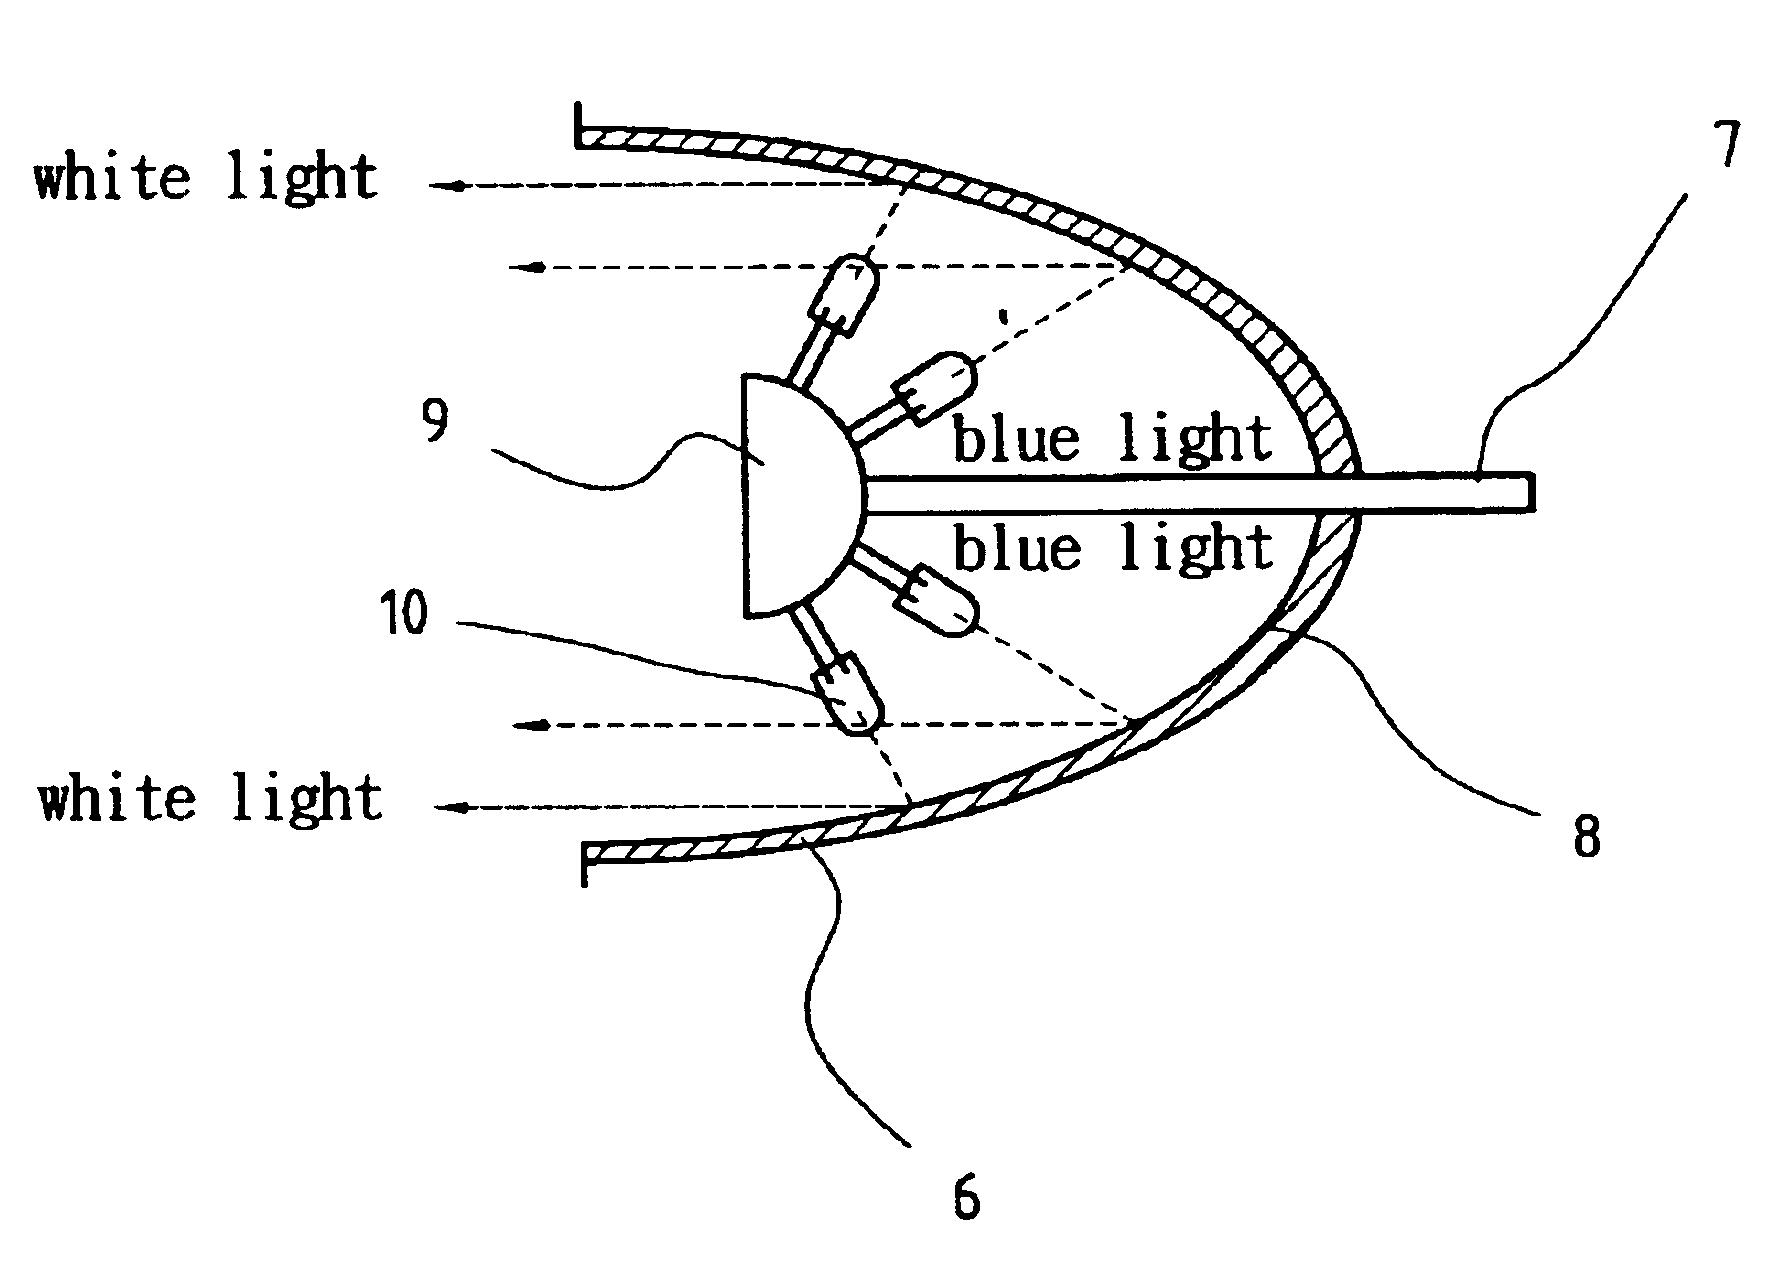 Device of white light-emitting diode